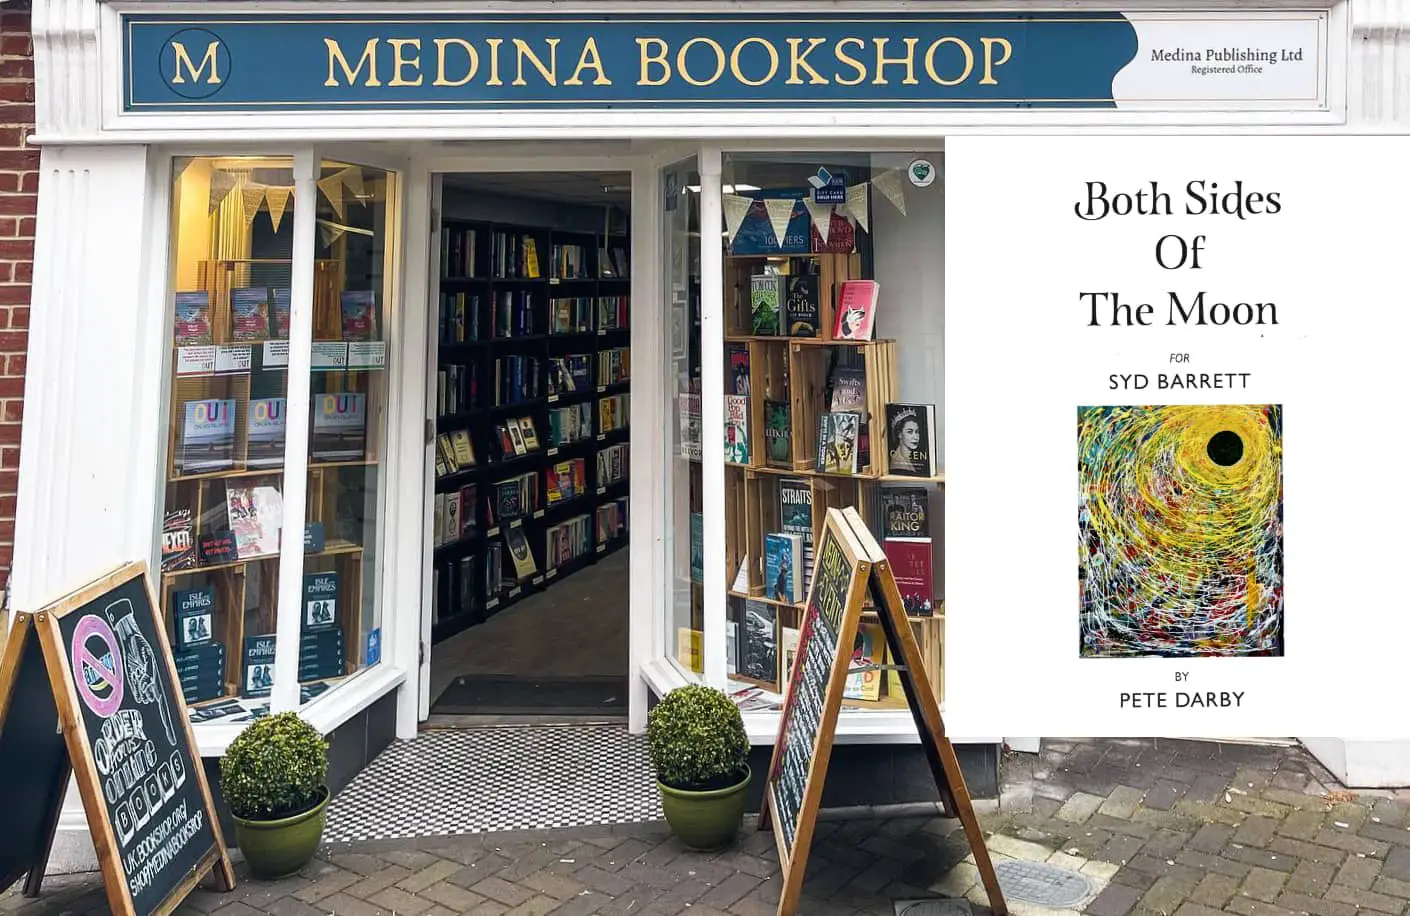 Medina bookshop and Pete Darby book cover